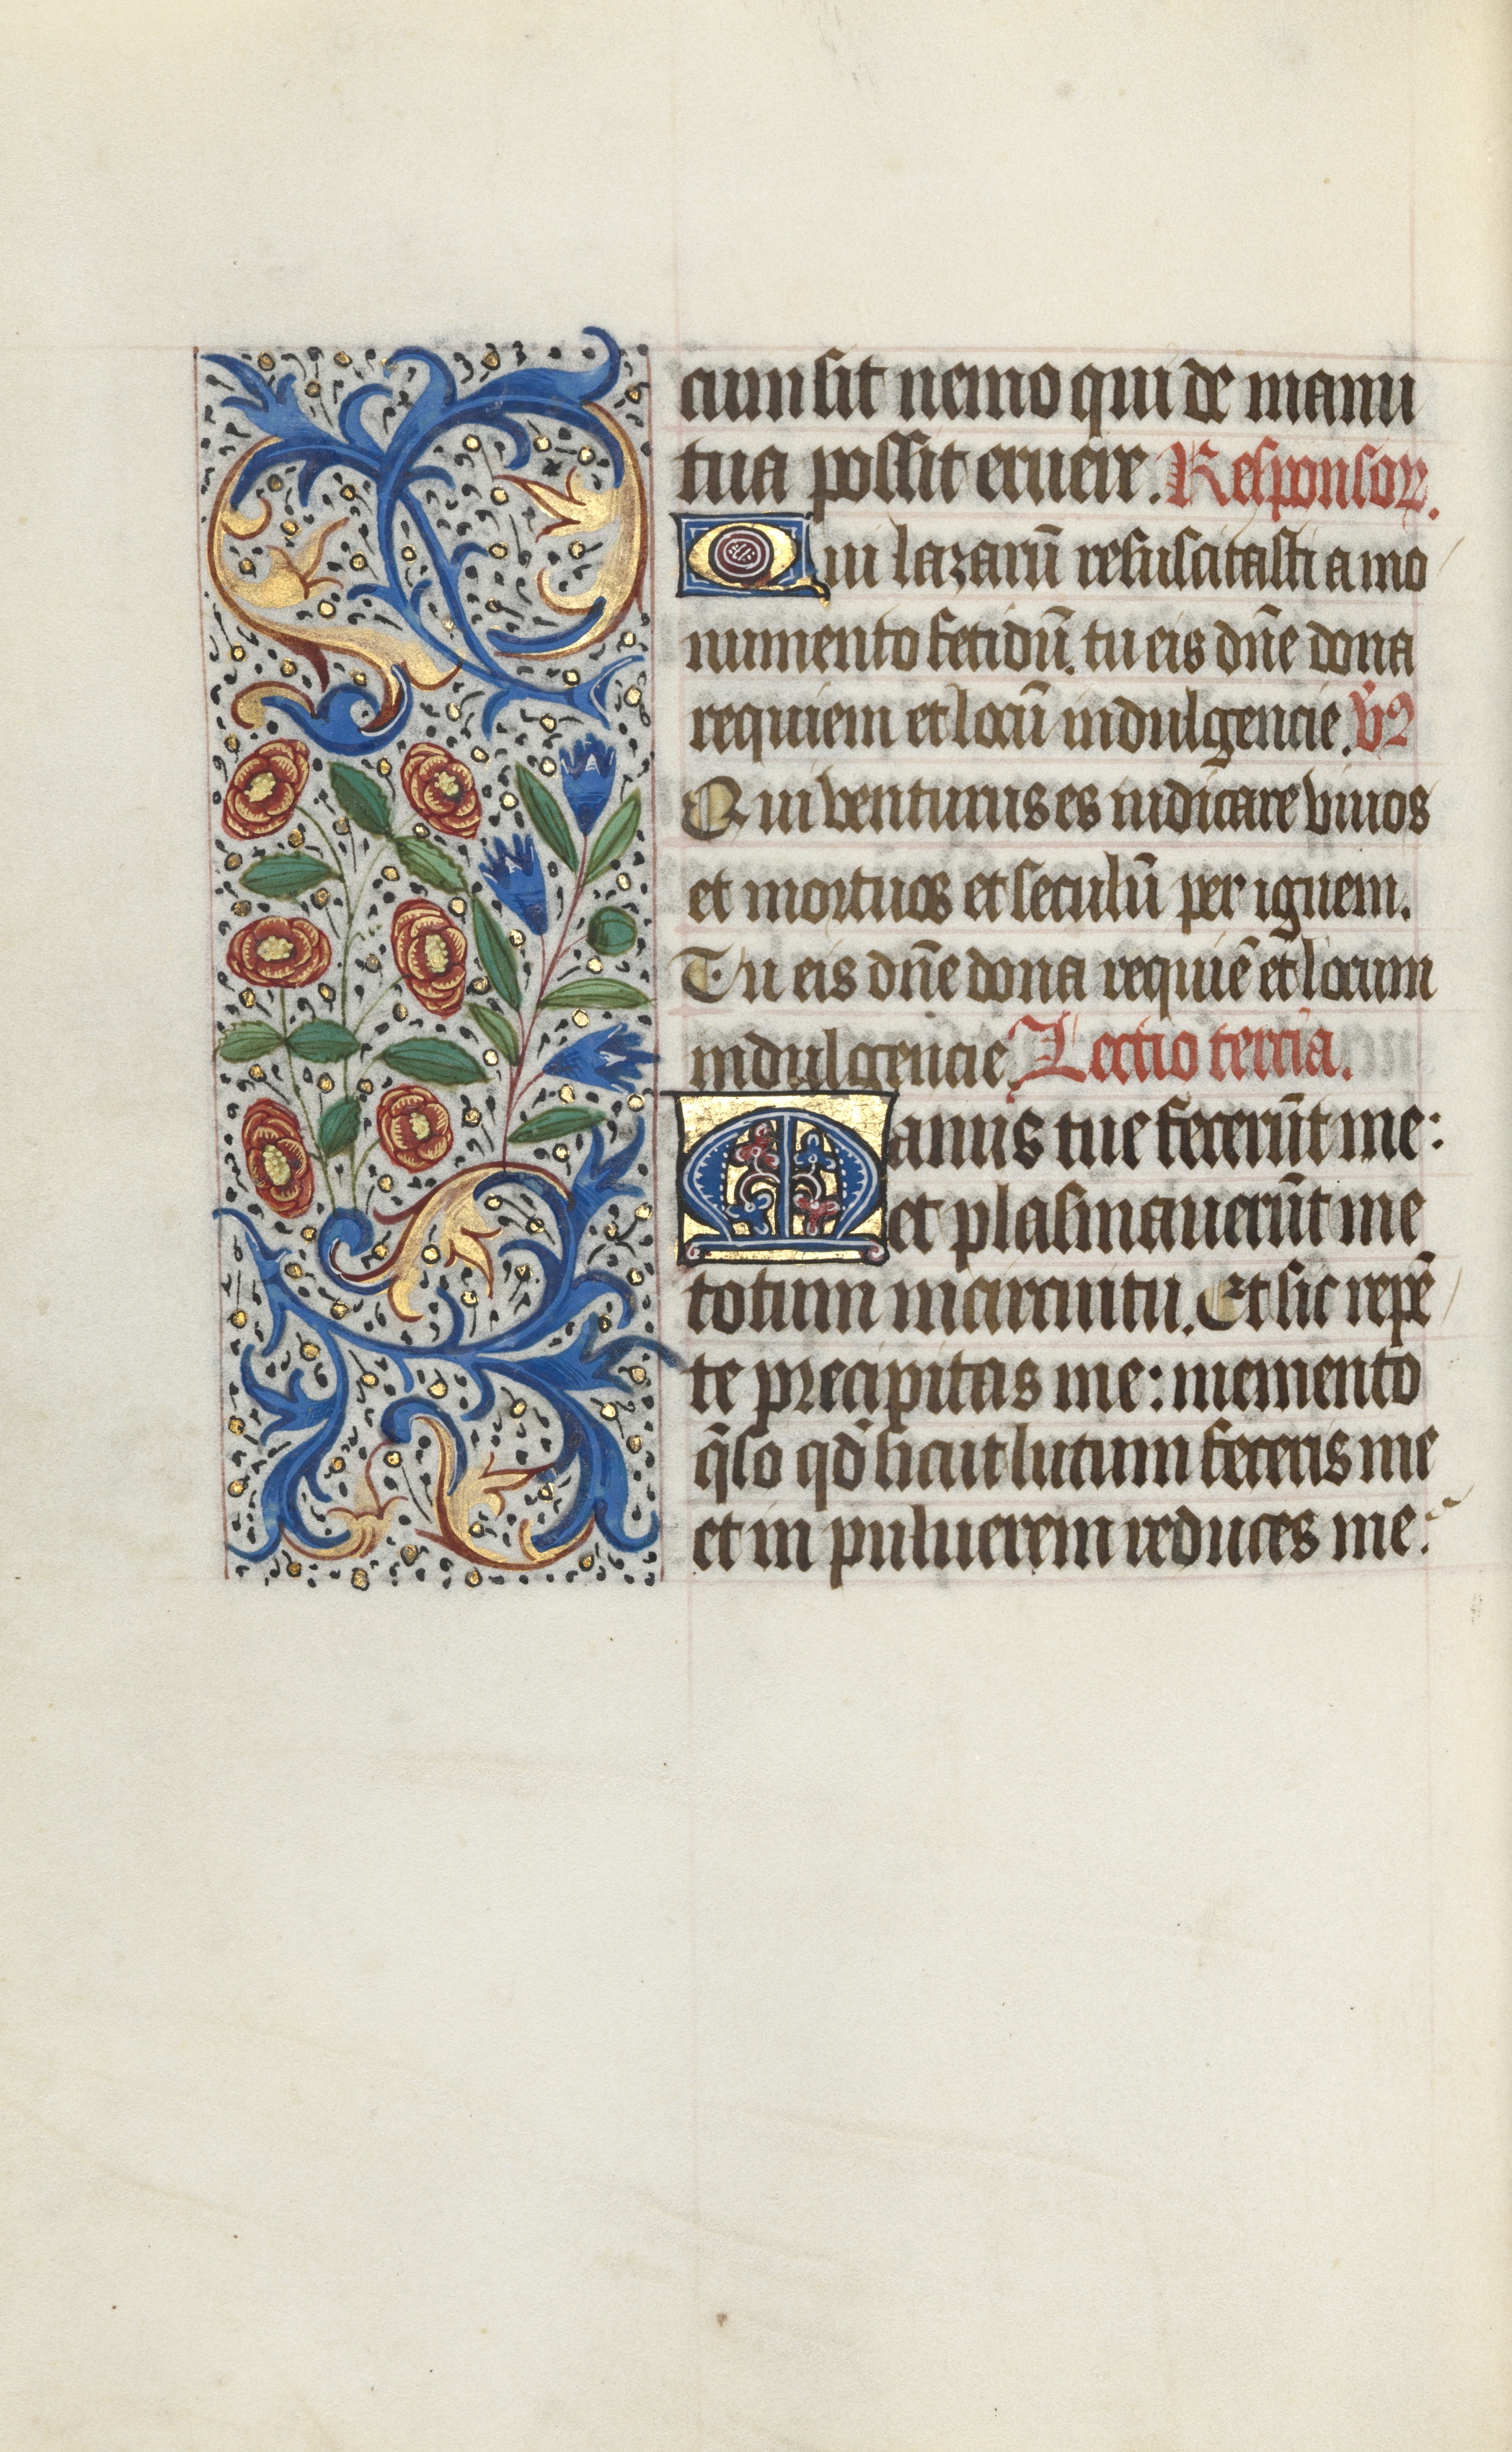 Book of Hours (Use of Rouen): fol. 116v